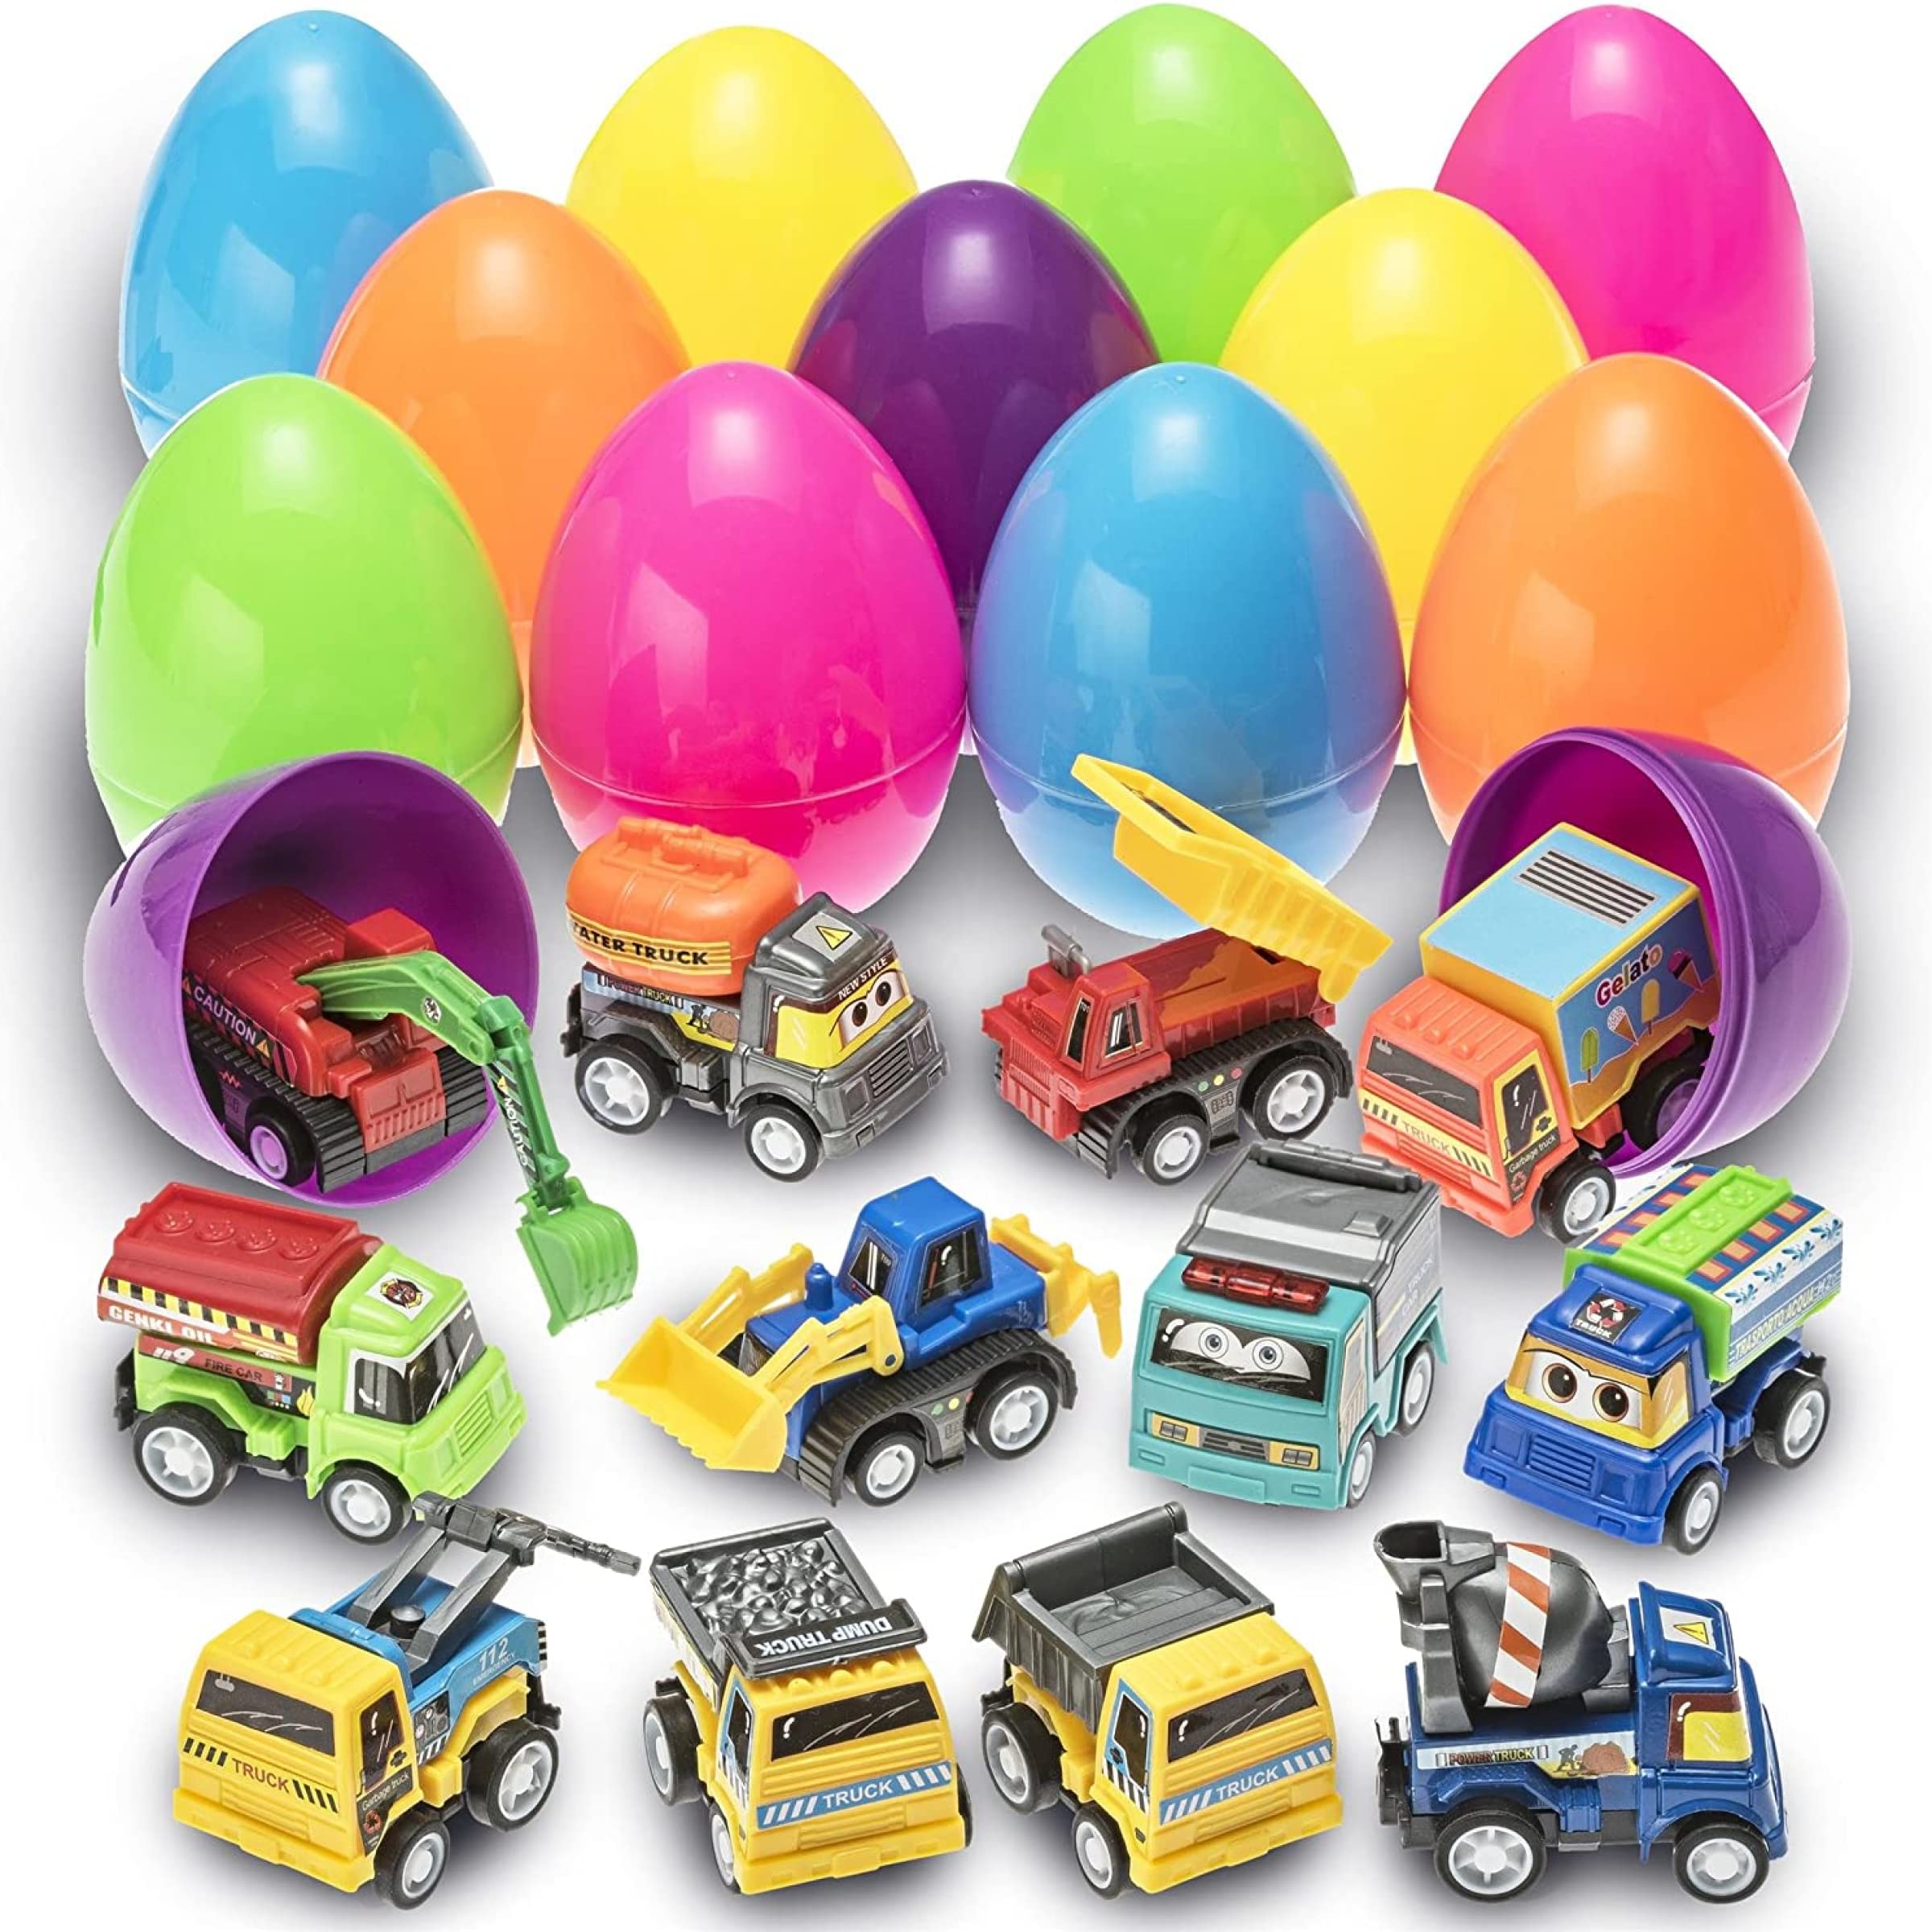 PREXTEX Toy Filled Easter Eggs with Pull-Back Construction & Engineering Vehicles (12 pack) – Easter Eggs with Toys Inside, Birthday Party Favors for Boys and Girls Over 3